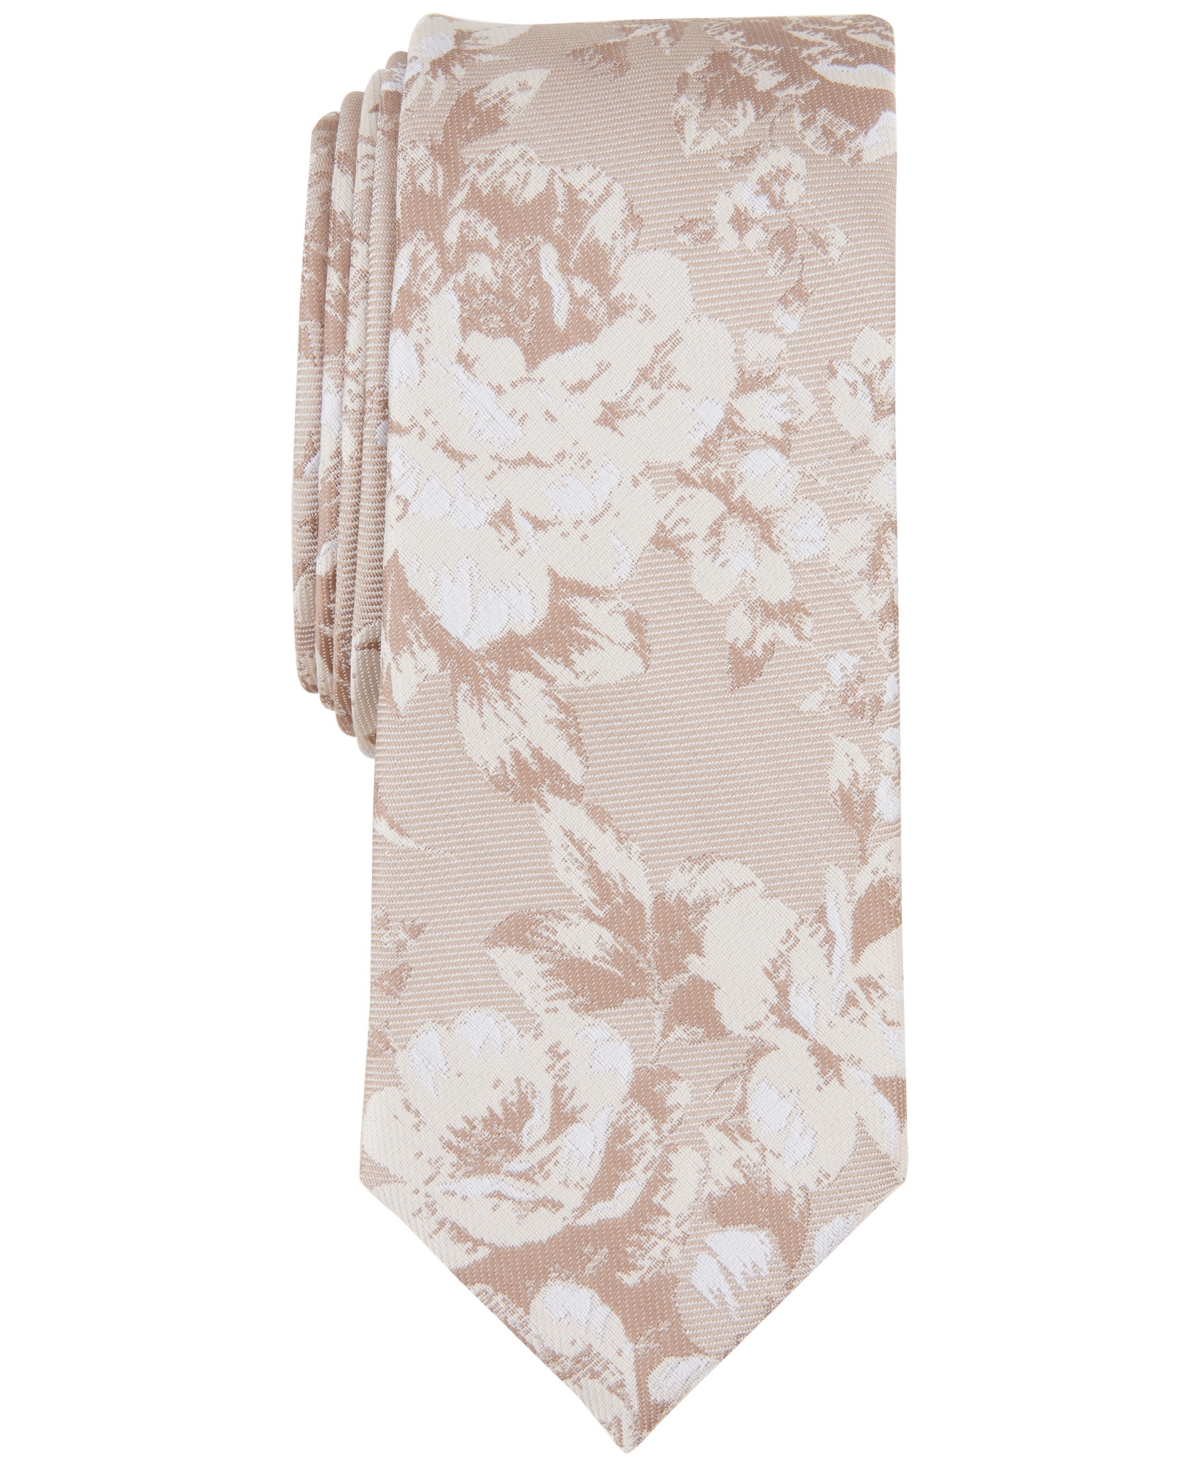 Men's Cheyenne Floral Tie, Created for Macy's - Tan